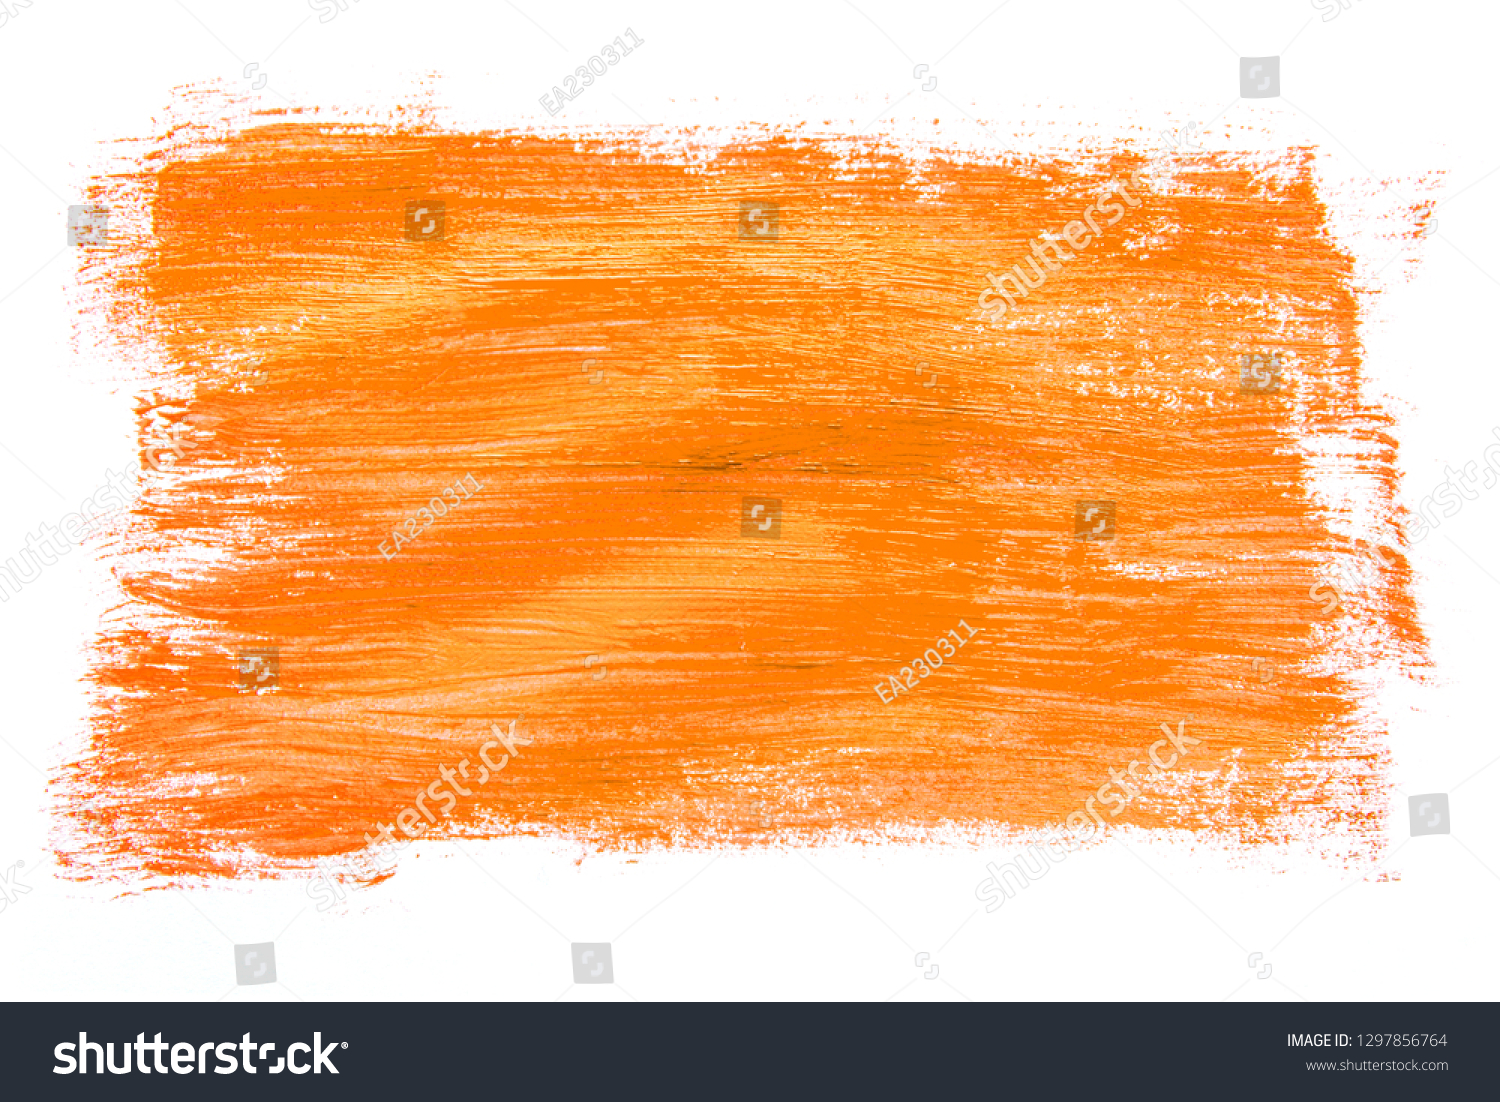 Abstraction for background, rectangular pattern with orange paint on white isolated background. Horizontal frame #1297856764